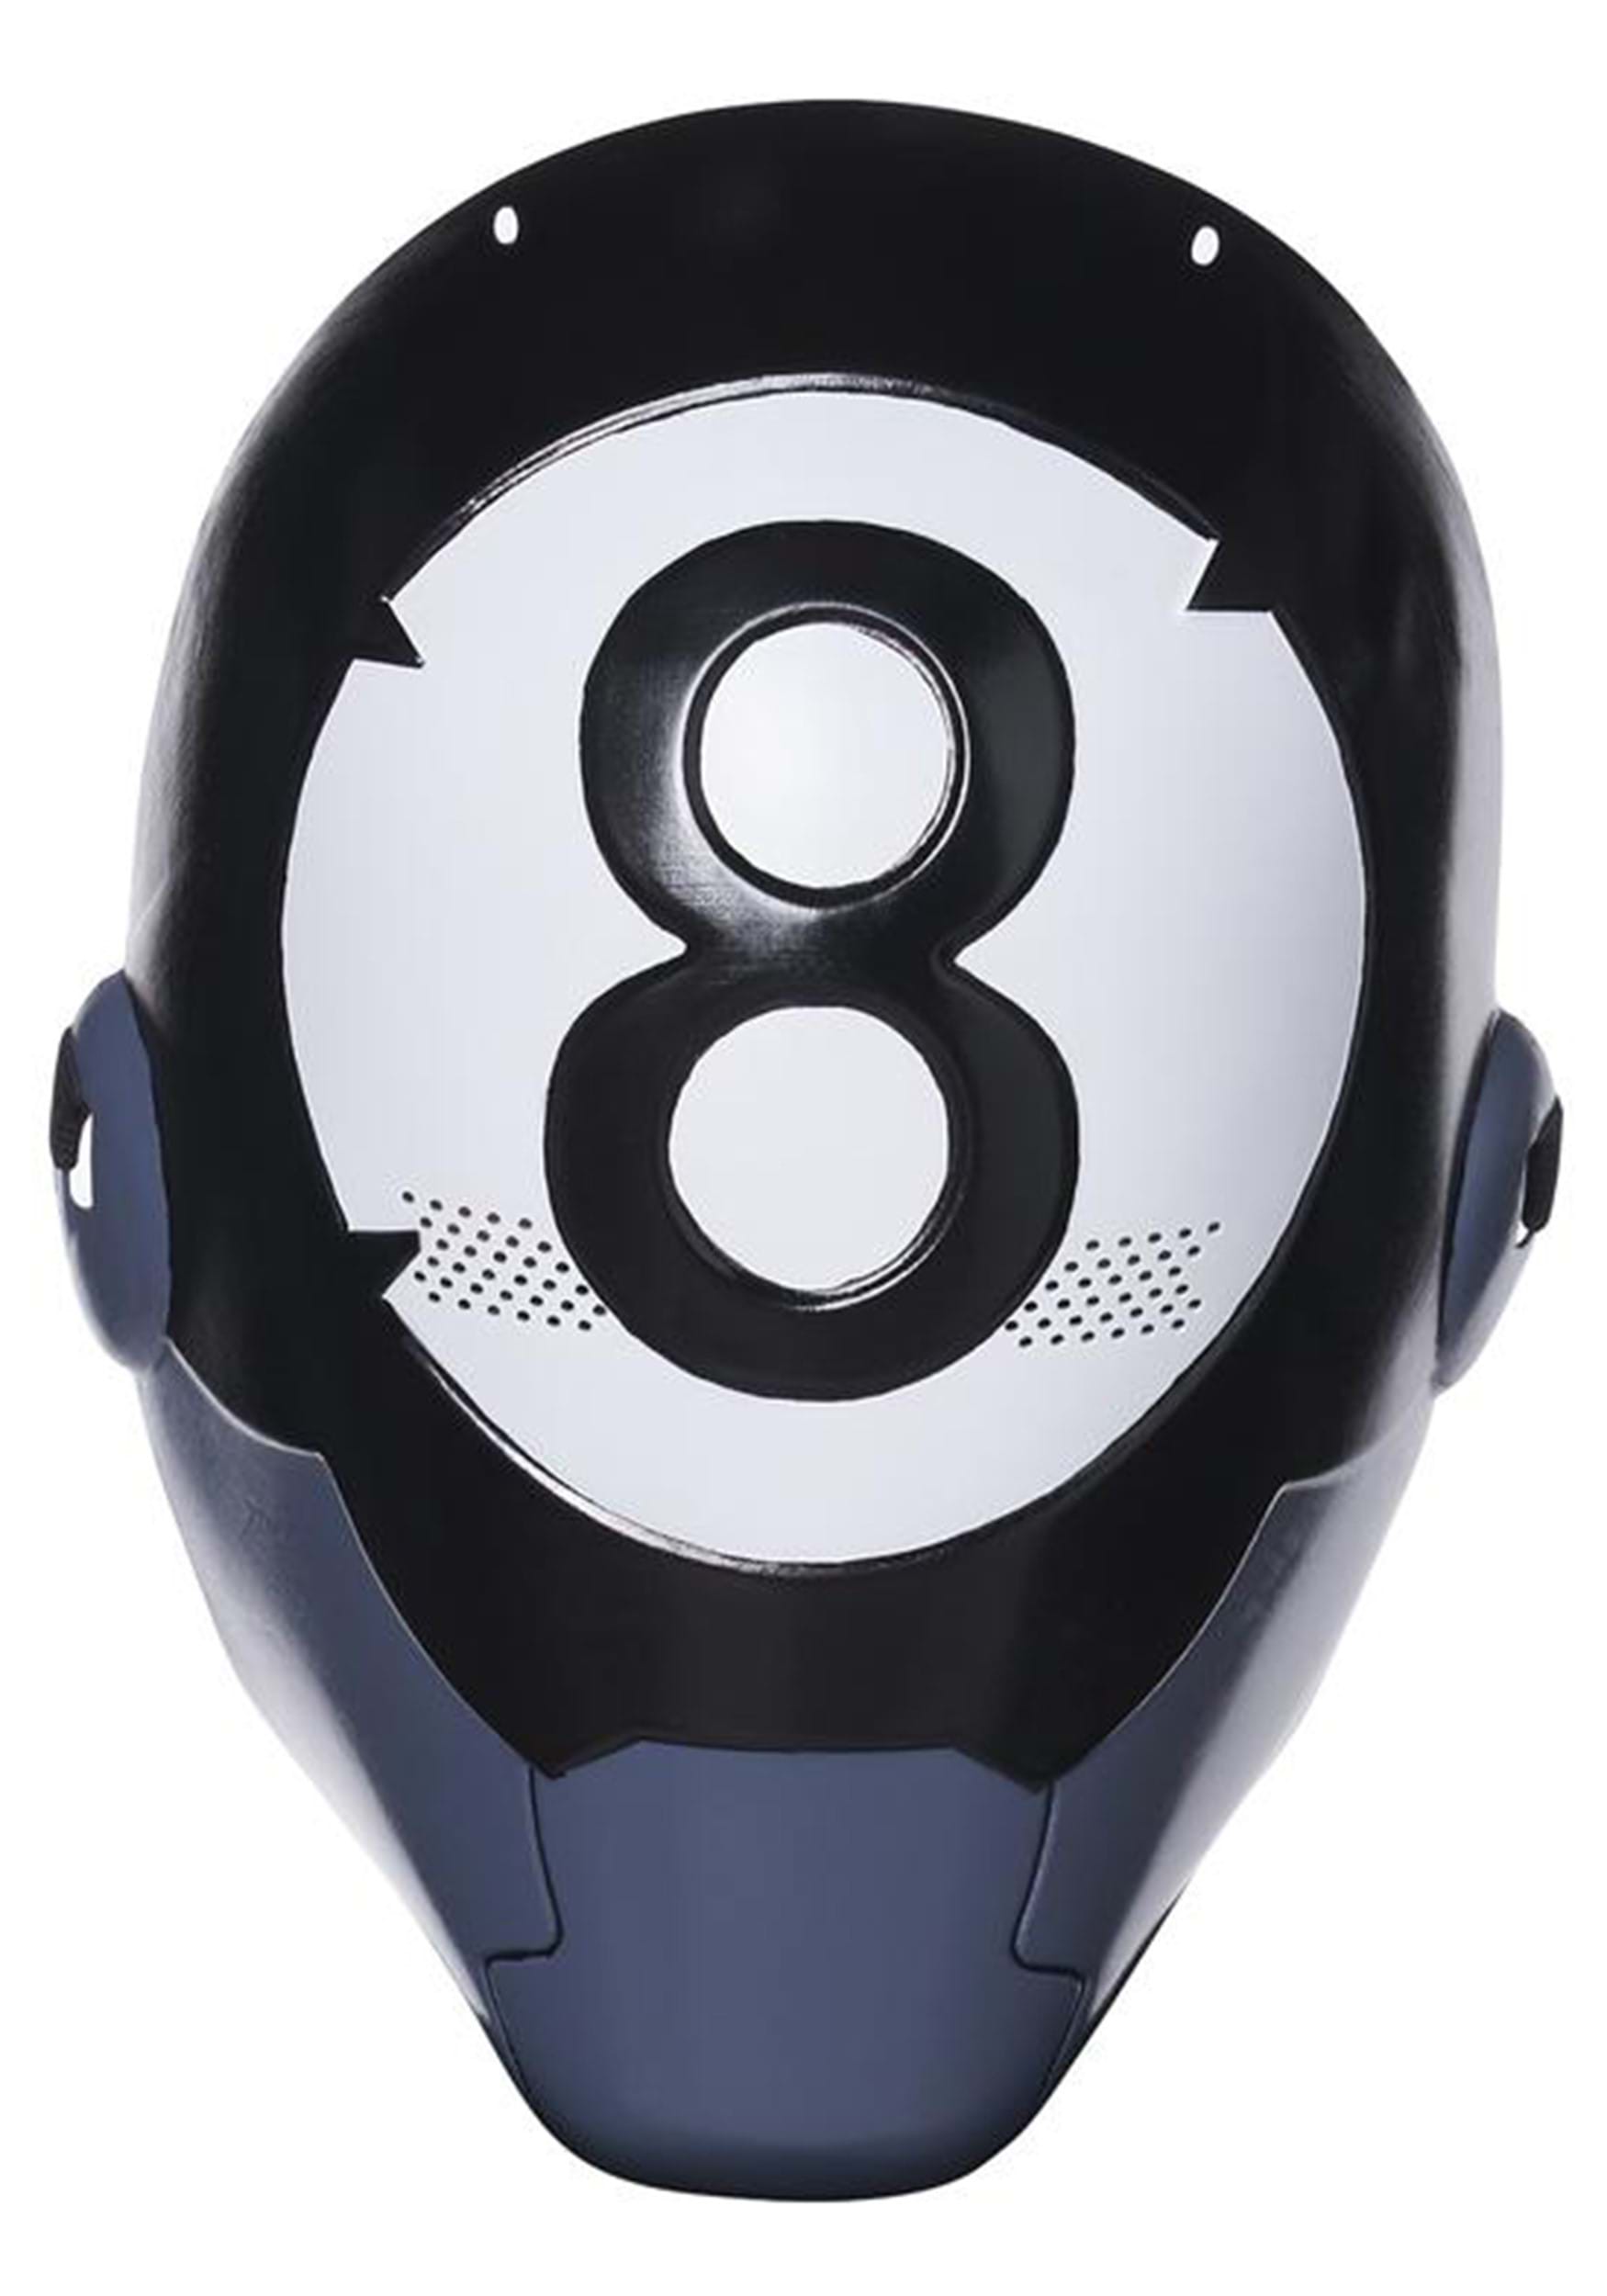 Eight ball from fortnite